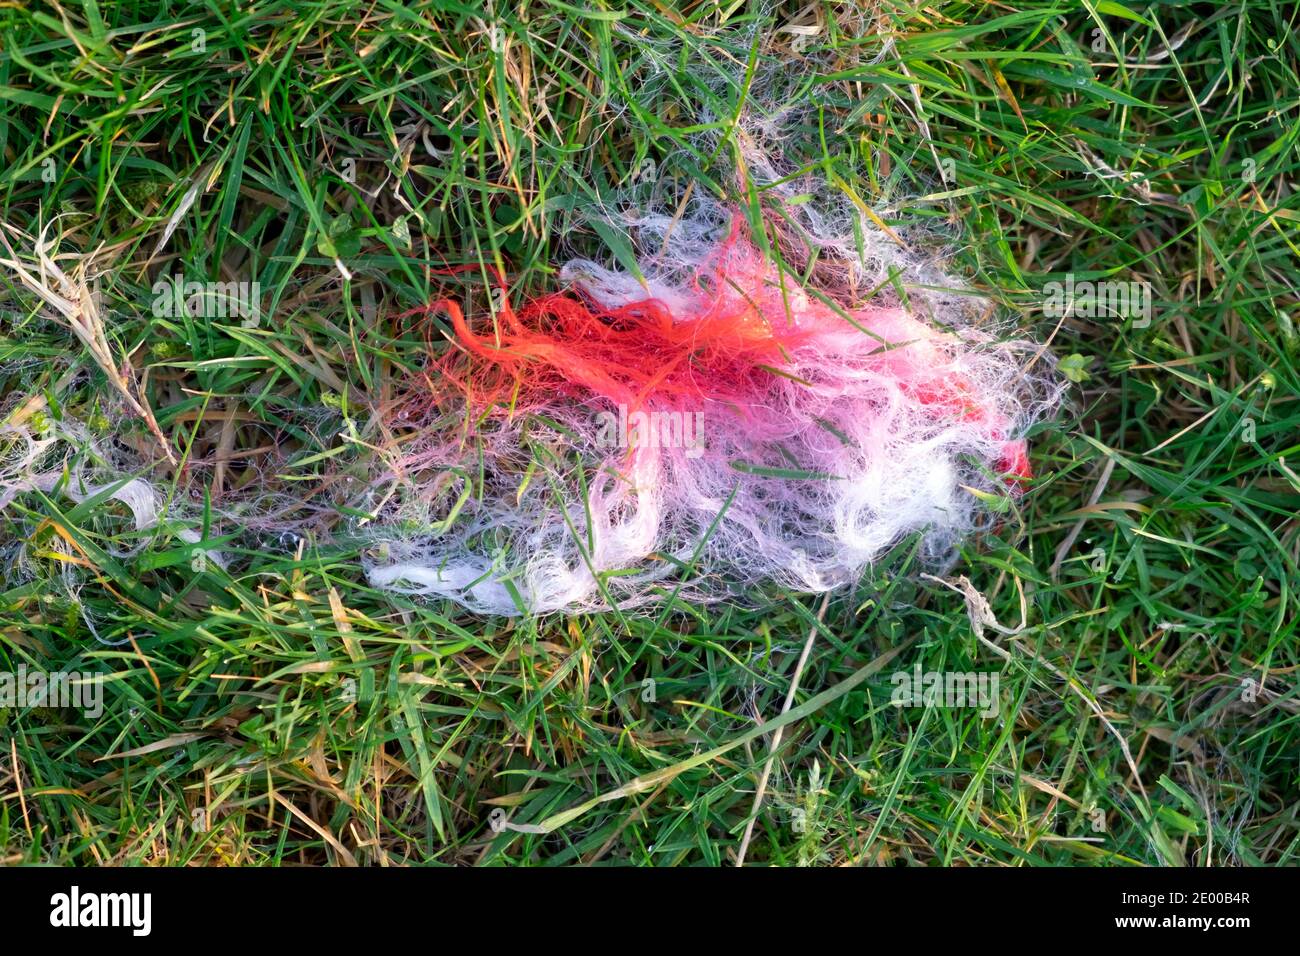 Red raddle dye on wispy bits of white sheep wool from a ravaged sheep on green grass background in field Carmarthenshire Wales UK   KATHY DEWITT Stock Photo